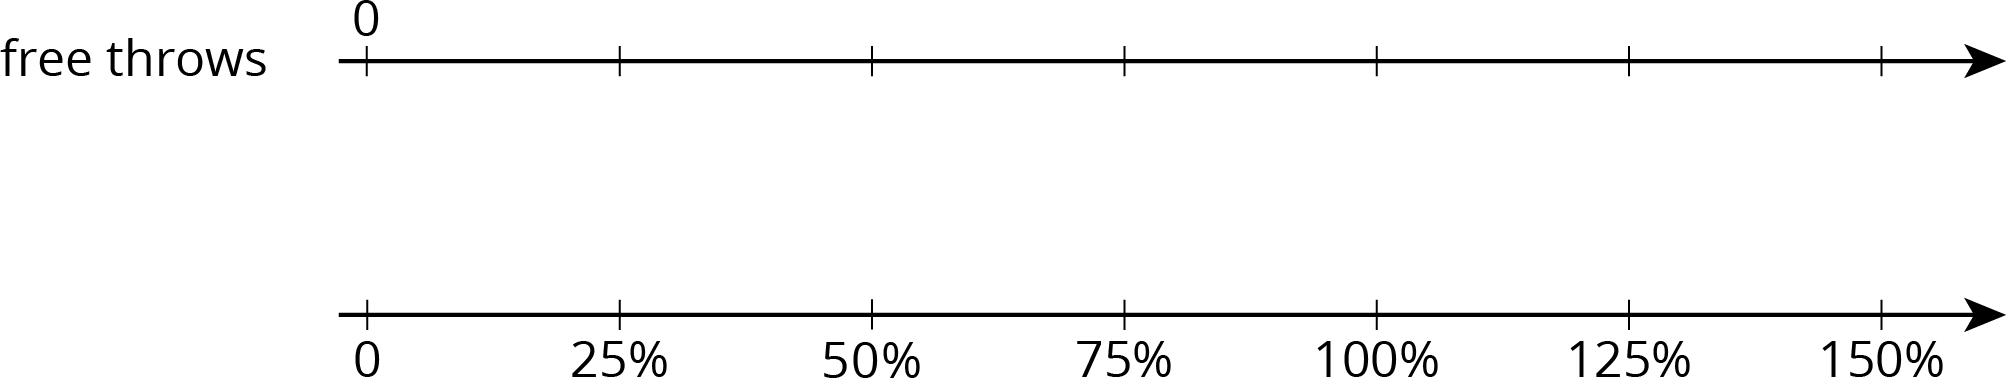 A double number line with 7 evenly spaced tick marks. The top number line is labeled “free throws” and the first tick mark is labeled 0. The other tick marks are unlabeled. The bottom number line is not labeled and starting with the first tick mark 0, 25 percent, 50 percent, 75 percent, 100 percent, 125 percent, and 150 percent are labeled.